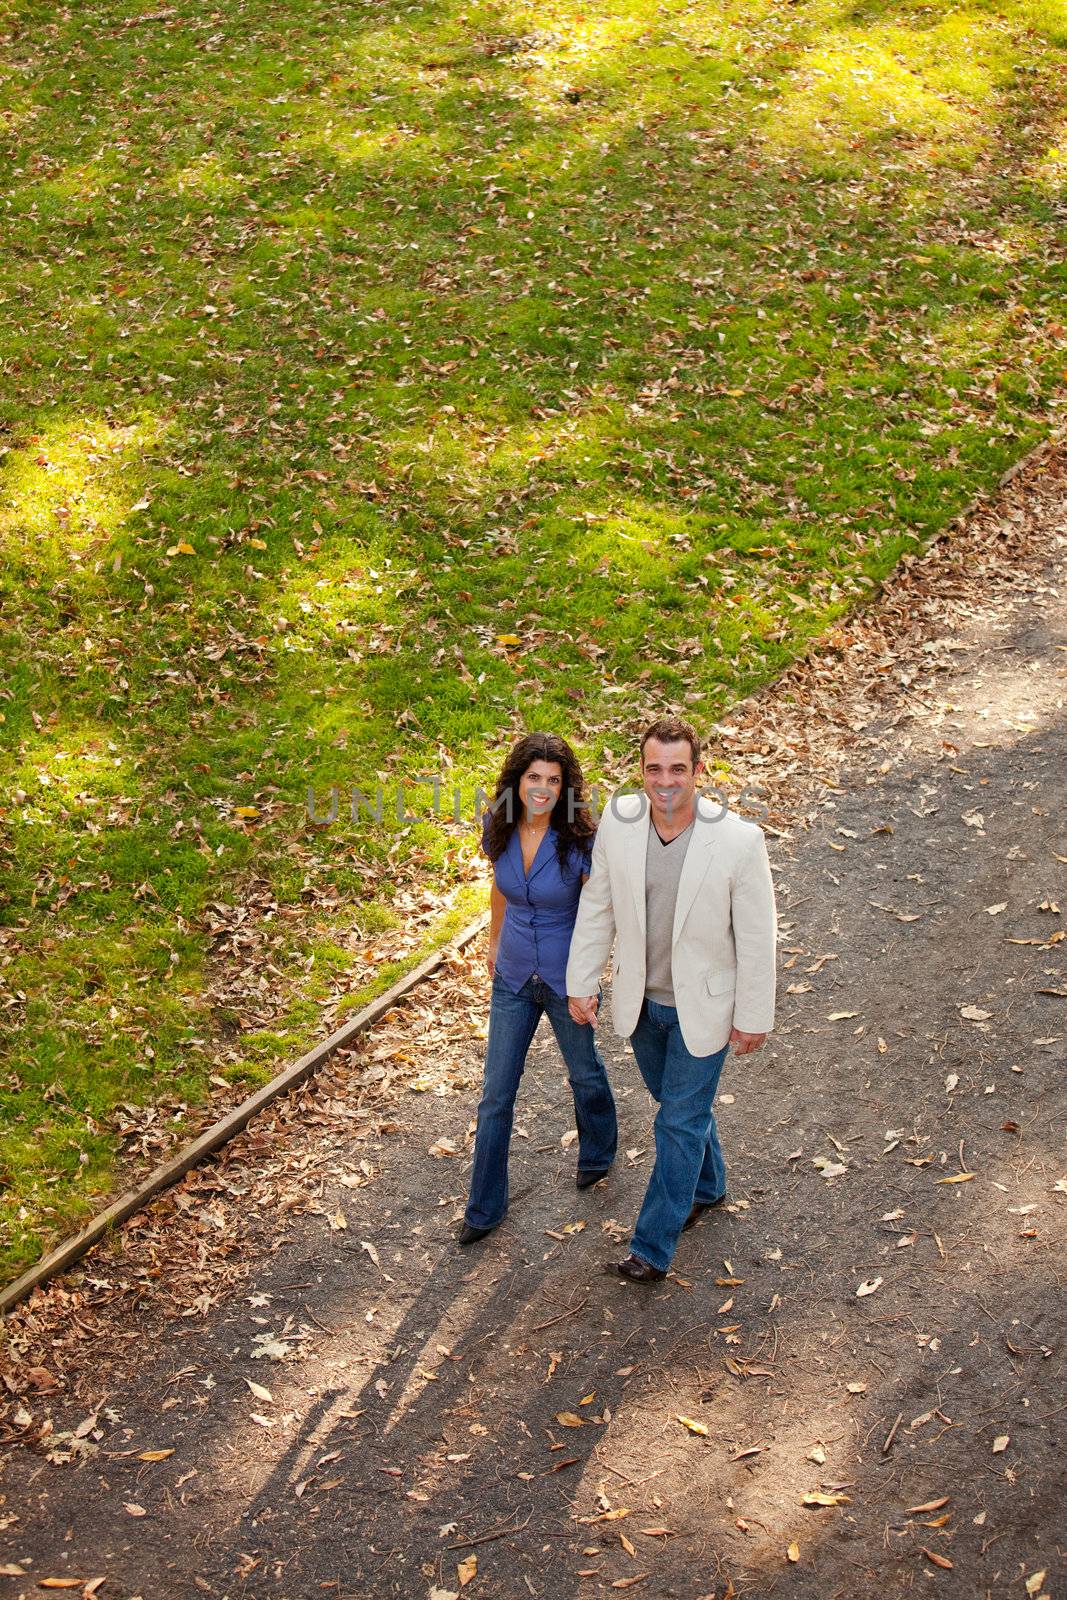 A couple walking in a park on a path